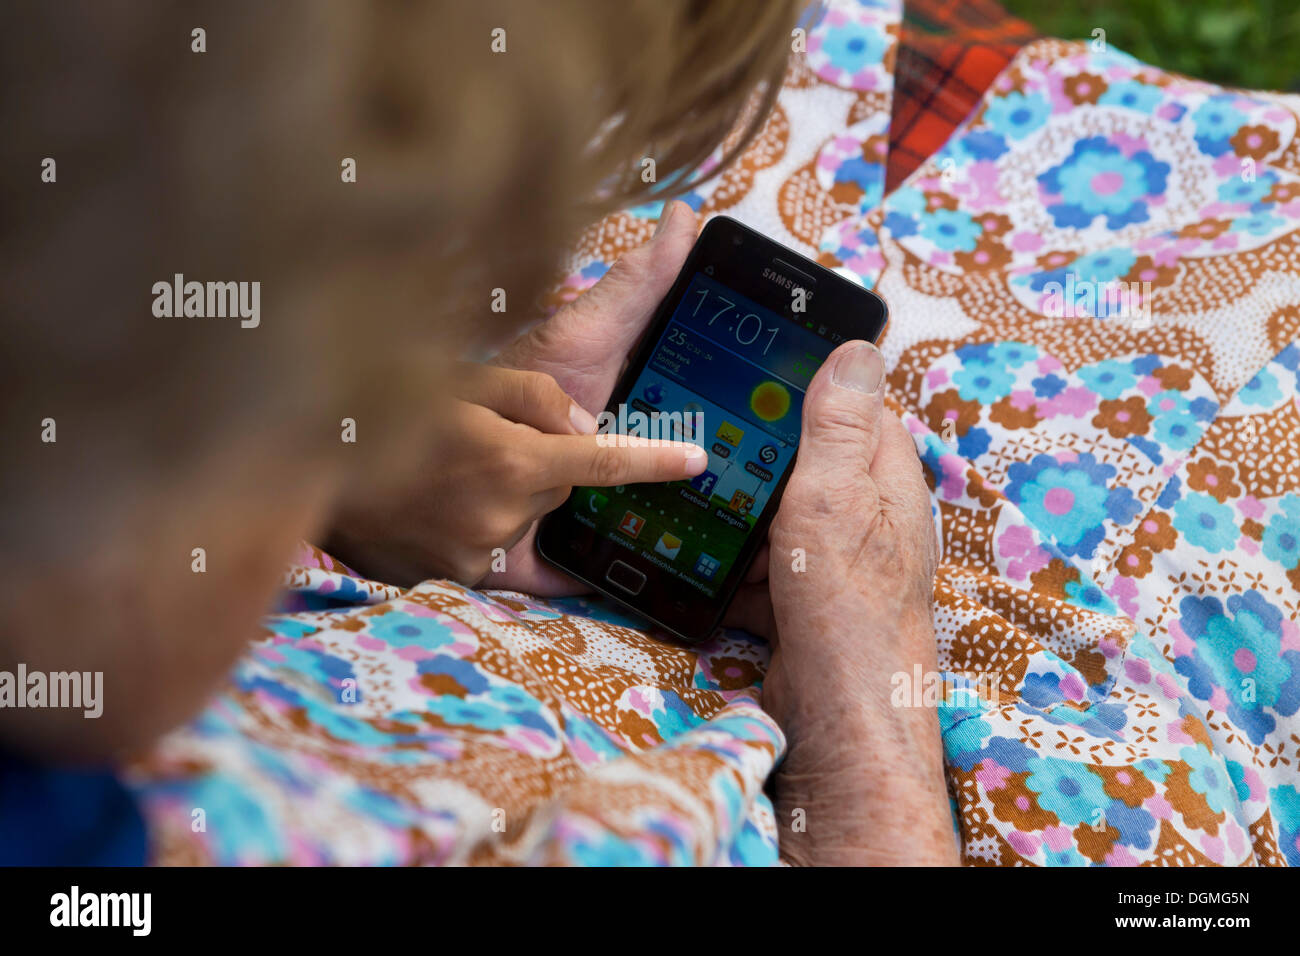 Child showing an elderly woman something on a smartphone Stock Photo